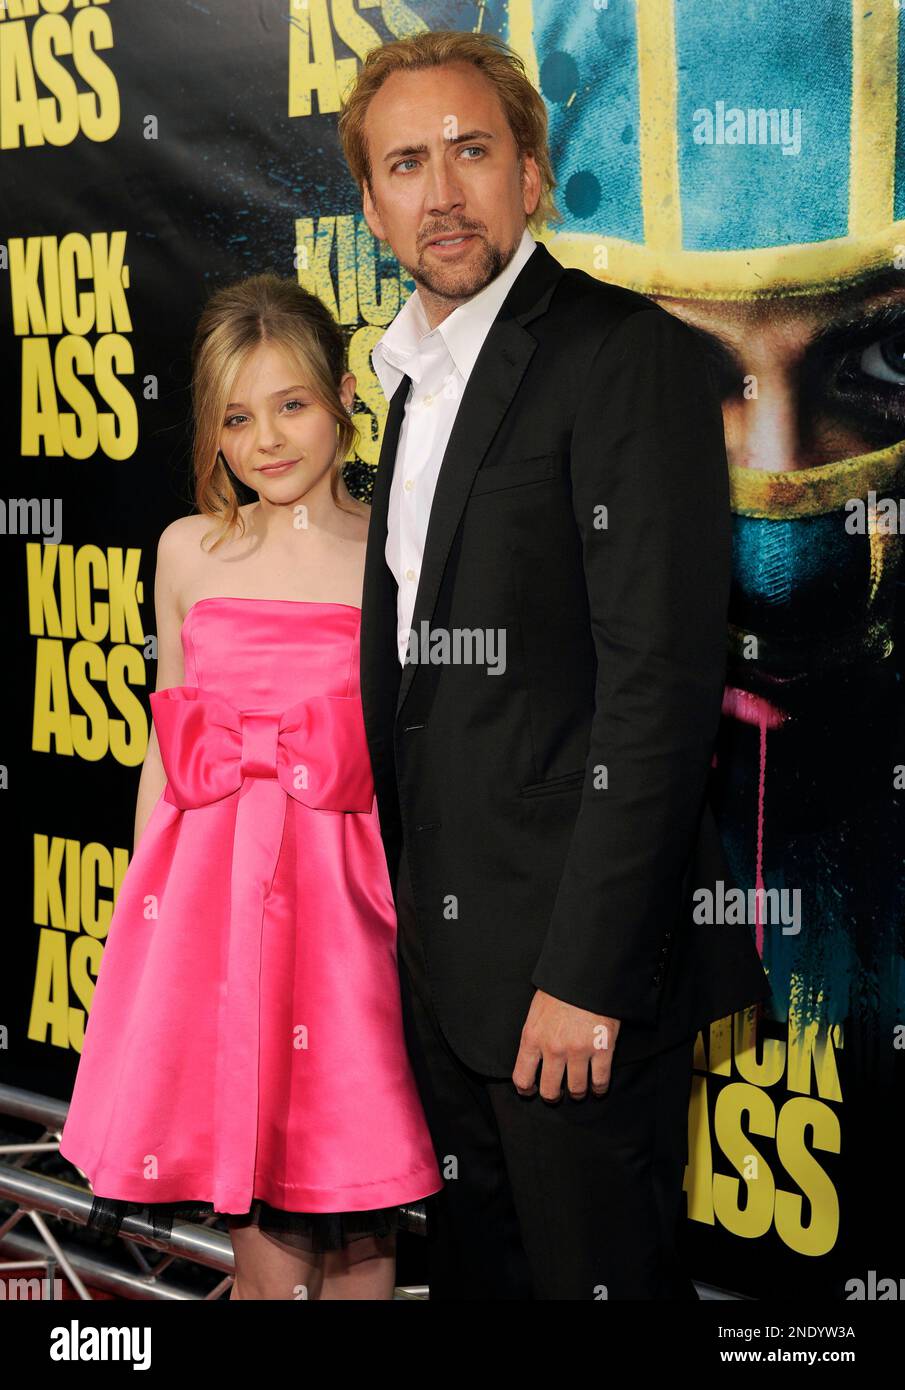 Chloe Grace Moretz, left, and Nicolas Cage, cast members in the film  Kick-Ass, pose together at the premiere of the film in Los Angeles,  Tuesday, April 13, 2010. (AP Photo/Chris Pizzello Stock